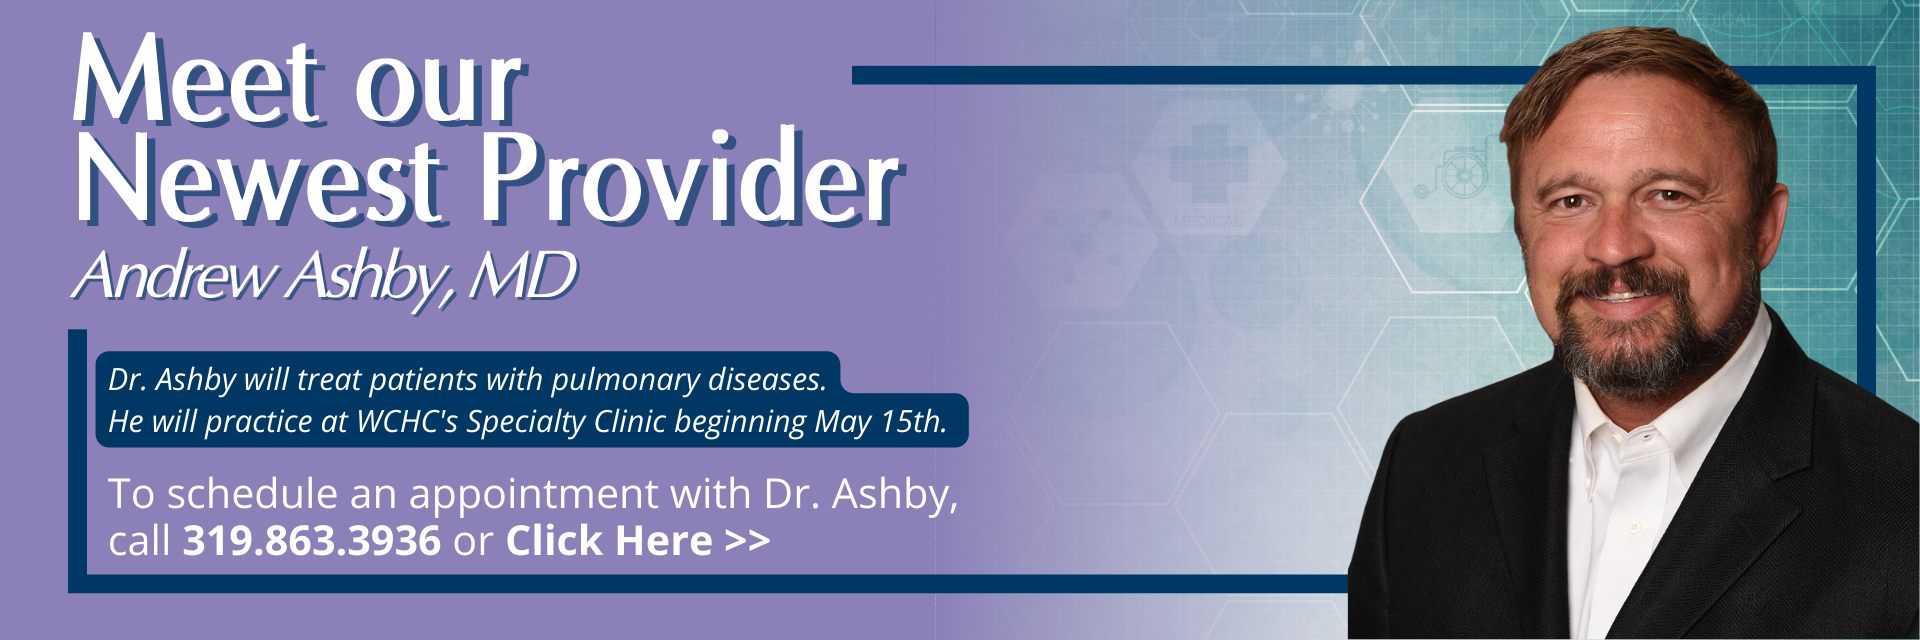 Meet our newest provider. Andy Ashby, MD
Andrew Ashby, MD


Dr. Ashby will treat patients with pulmonary diseases.
He will practice at WCHC's Specialty Clinic beginning May 15th.


To schedule an appointment with Dr. Ashby, call 319.863.3936